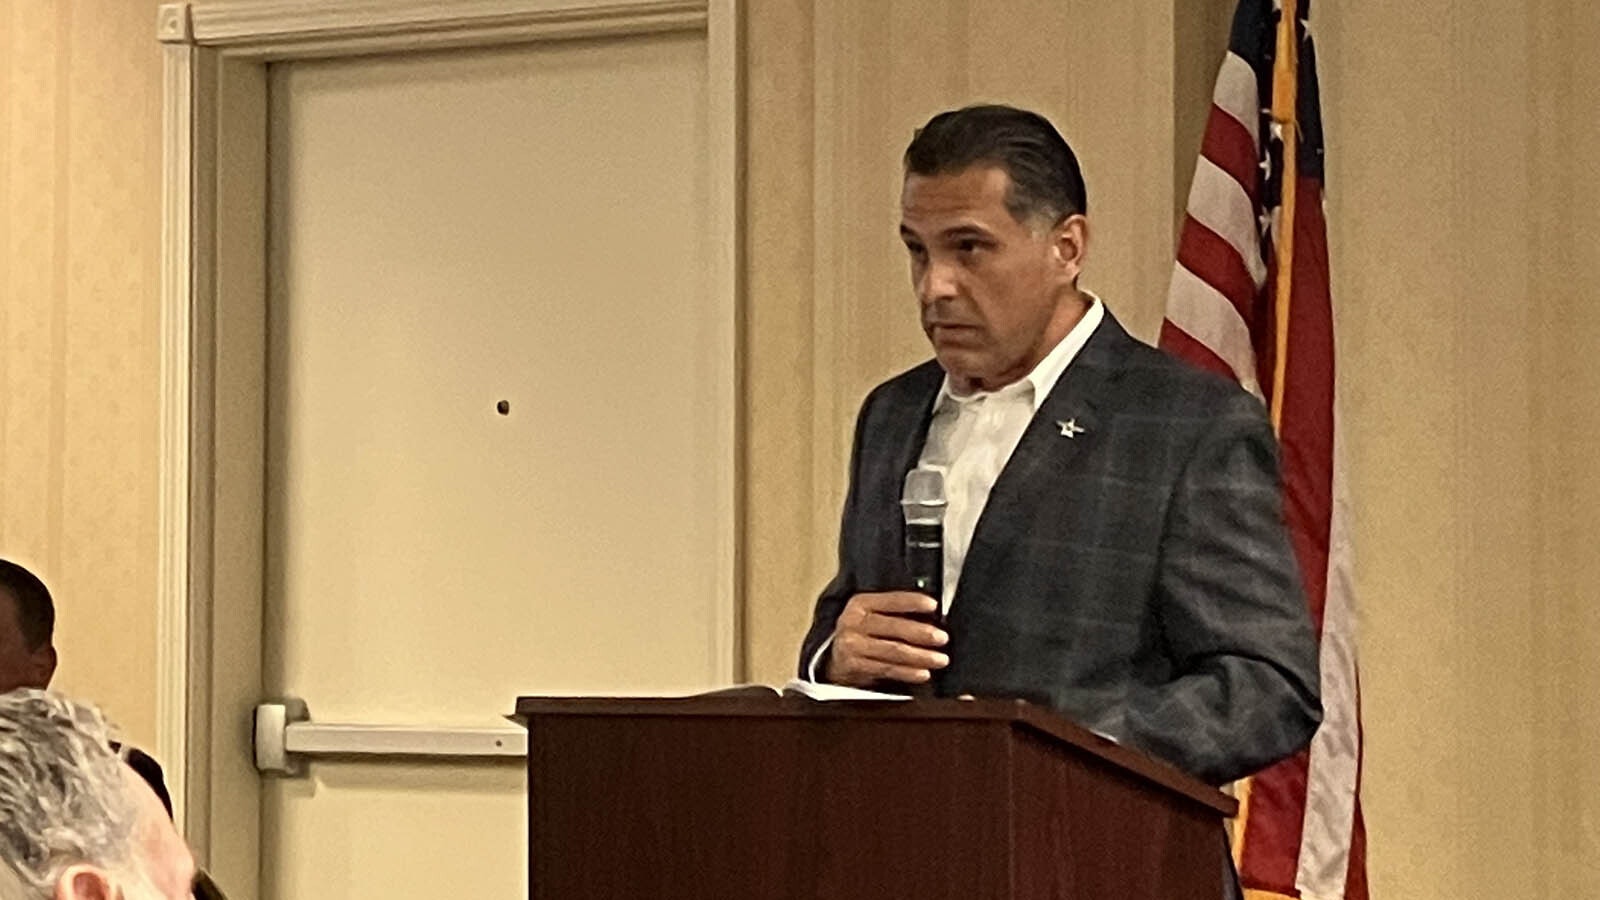 U.S. Postal Services Director for Western Processing Operations Felipe Flores addresses the crowd on Wednesday. He faced many skeptics.